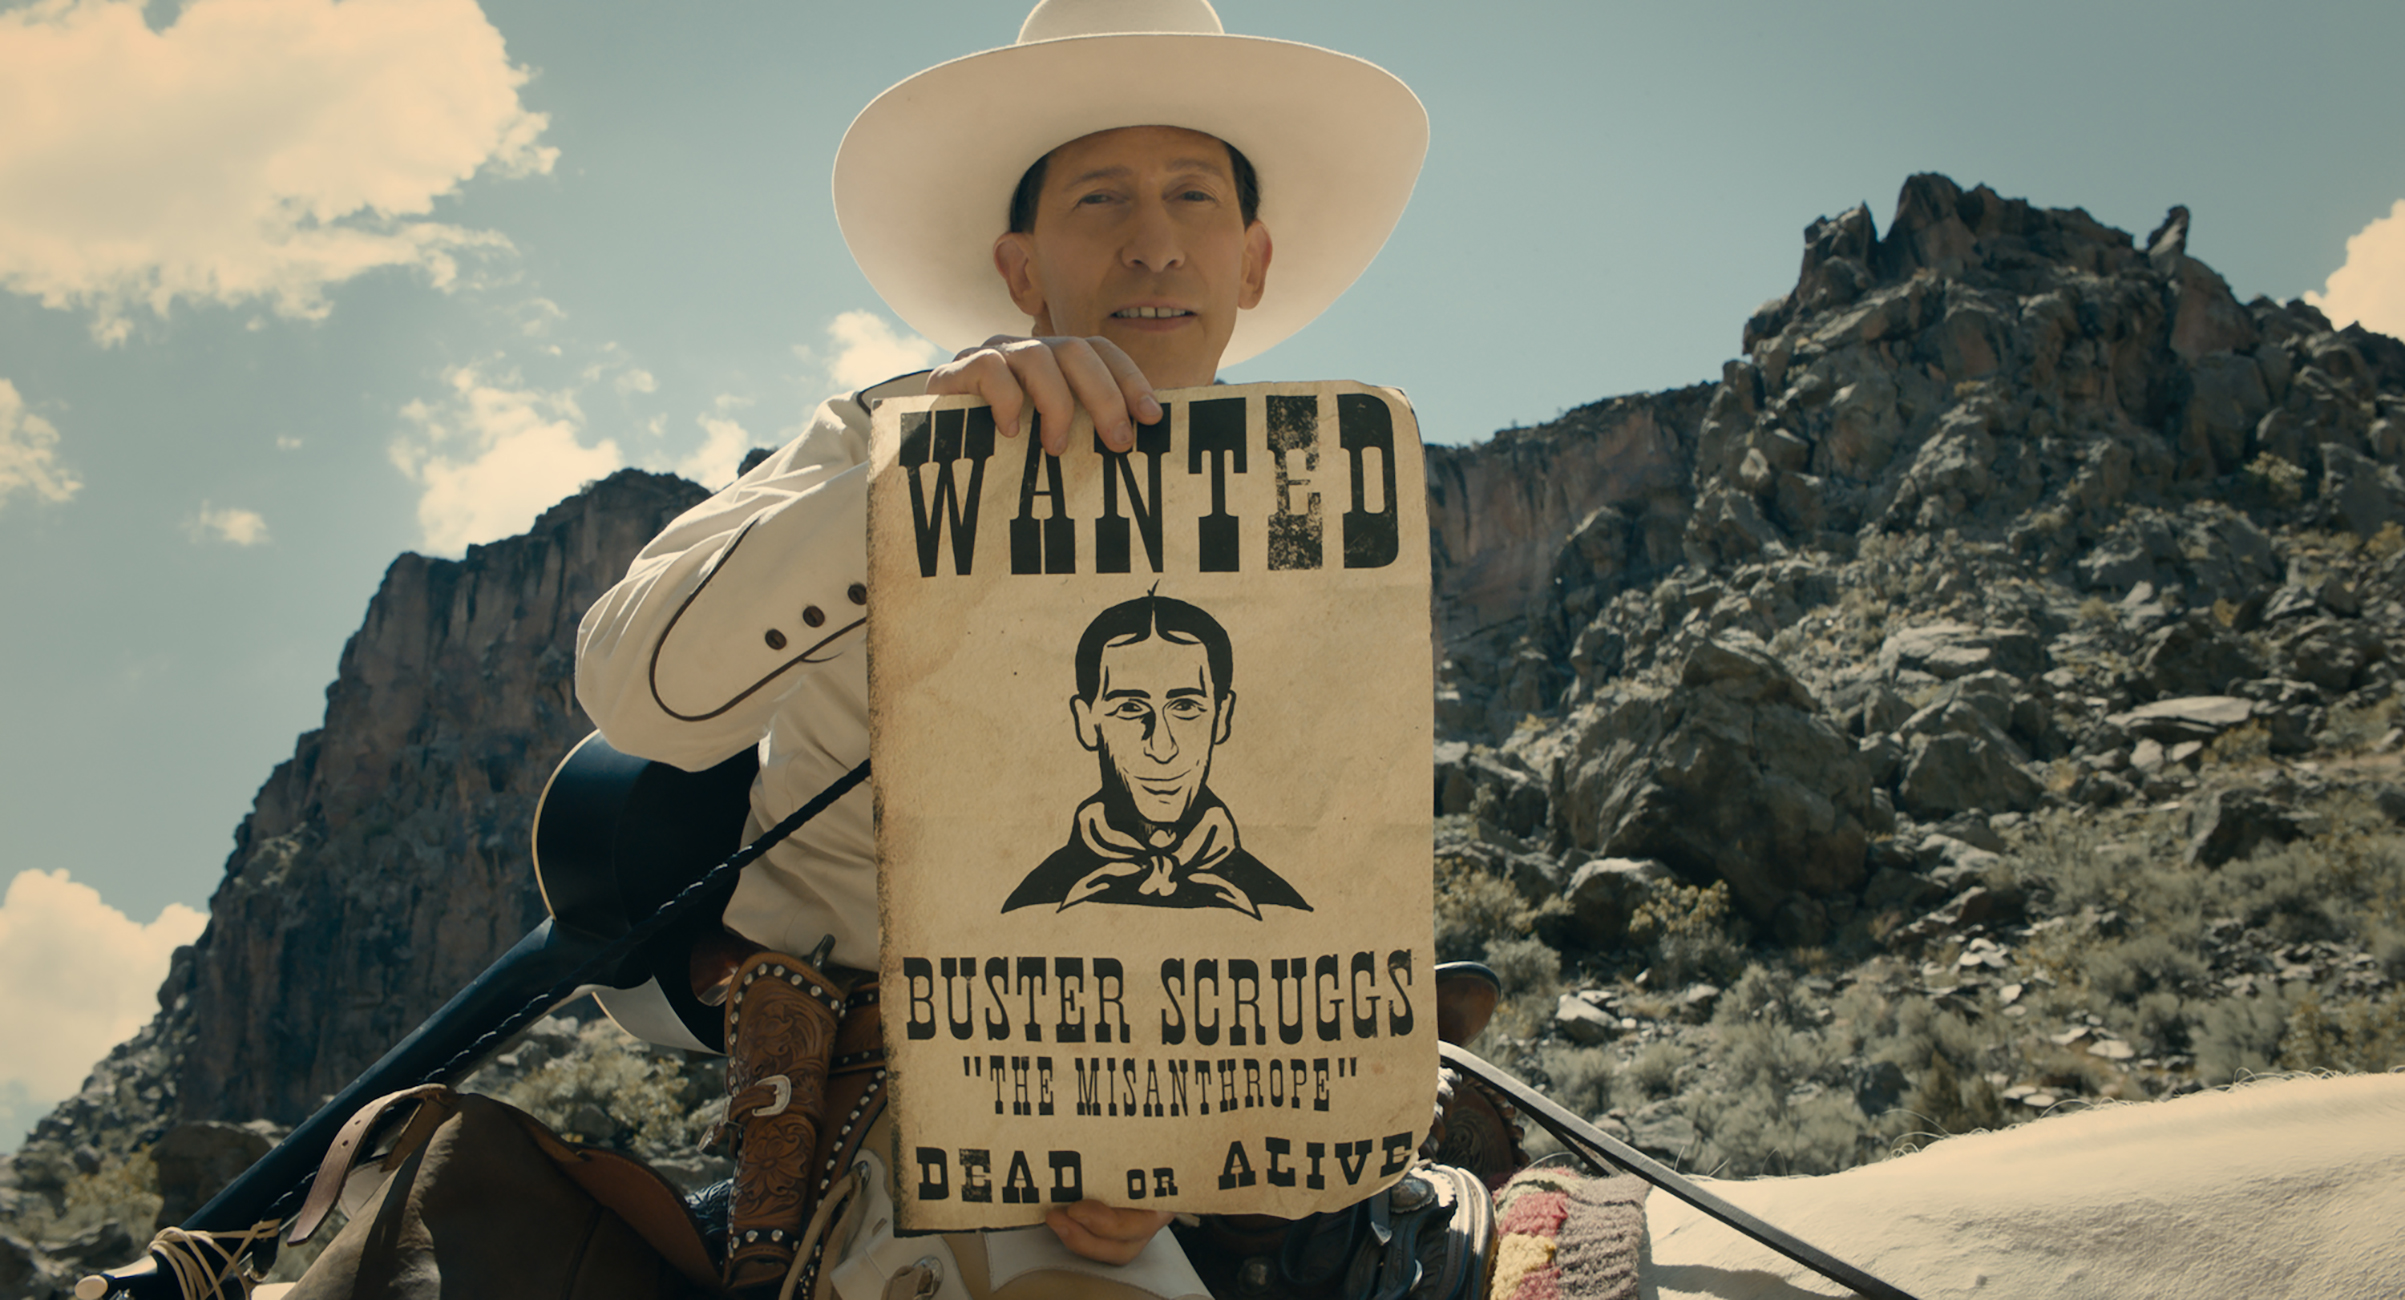 the-ballad-of-buster-scruggs-james-franco-film